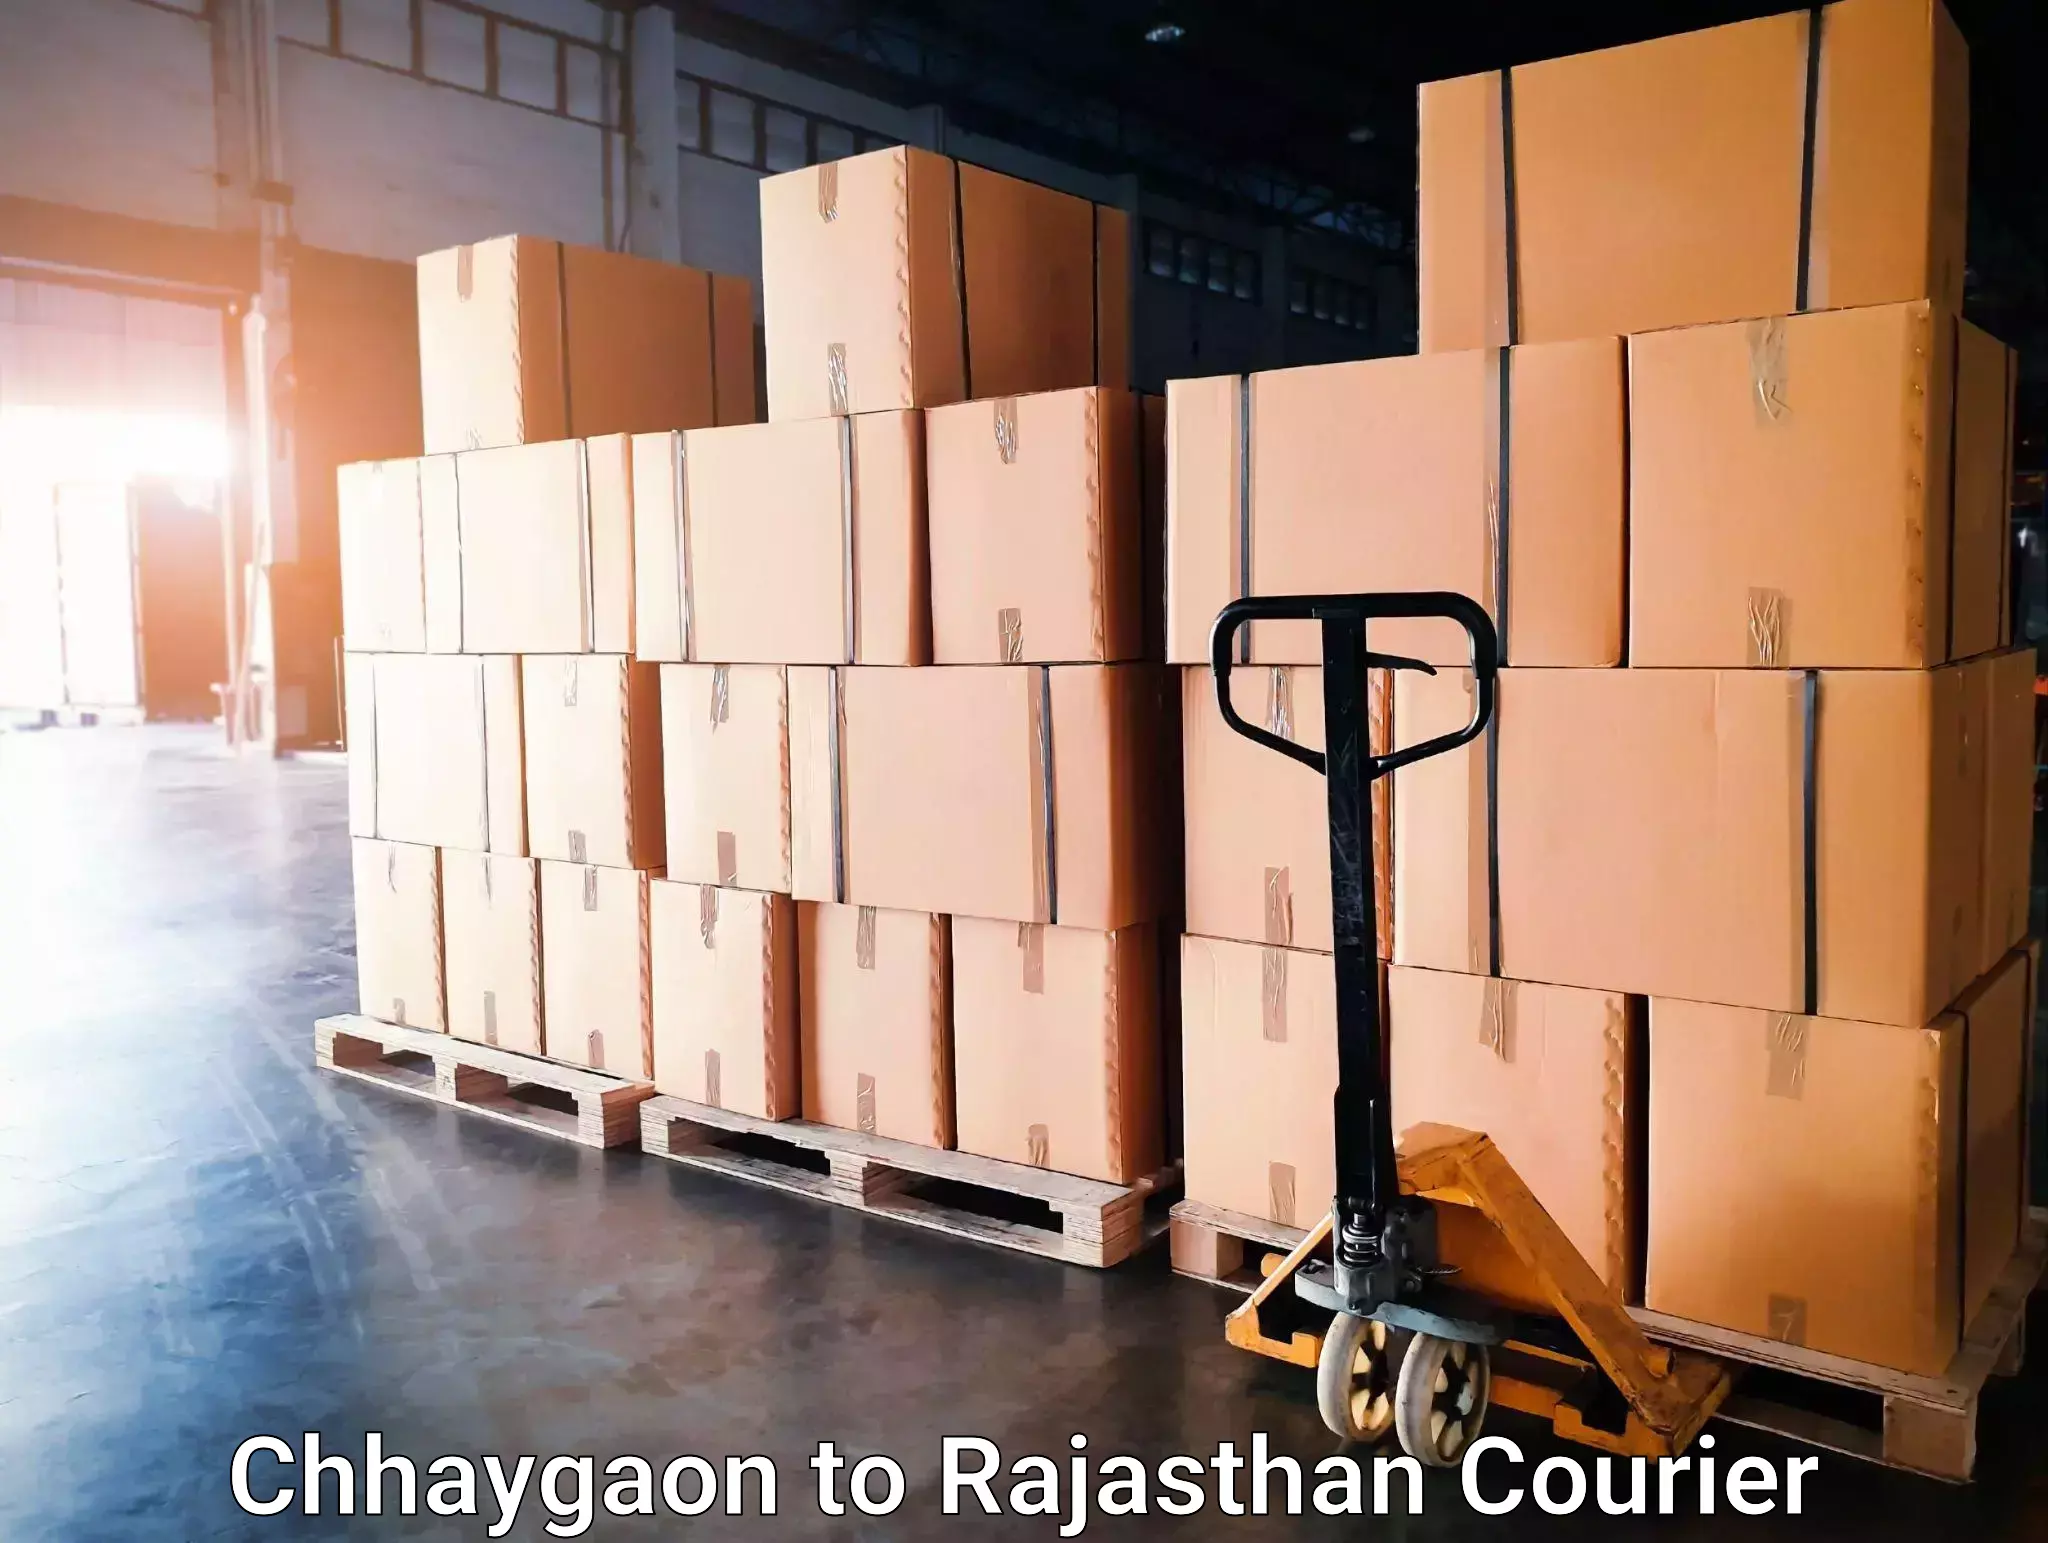 Parcel service for businesses Chhaygaon to Degana